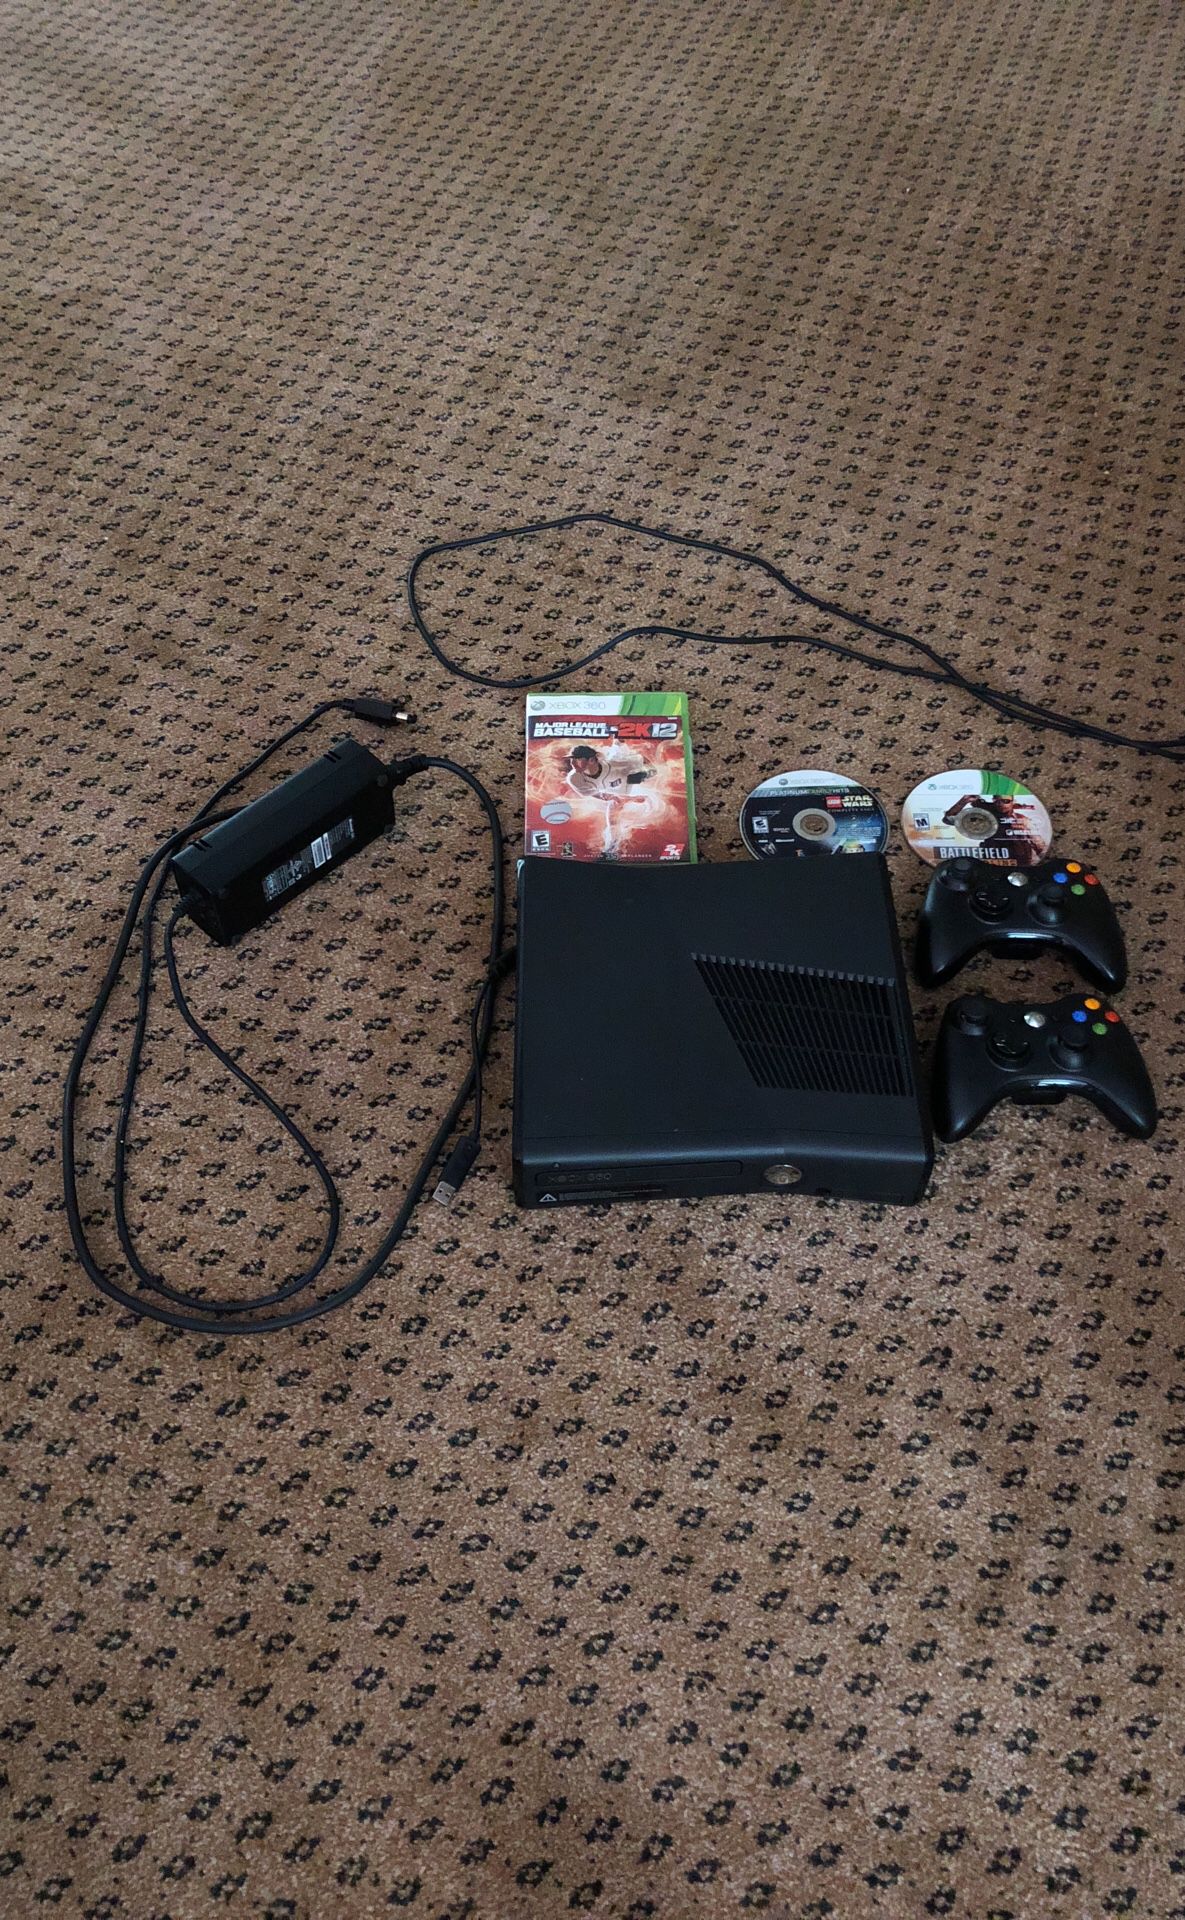 Xbox 360 with multiple games and controllers